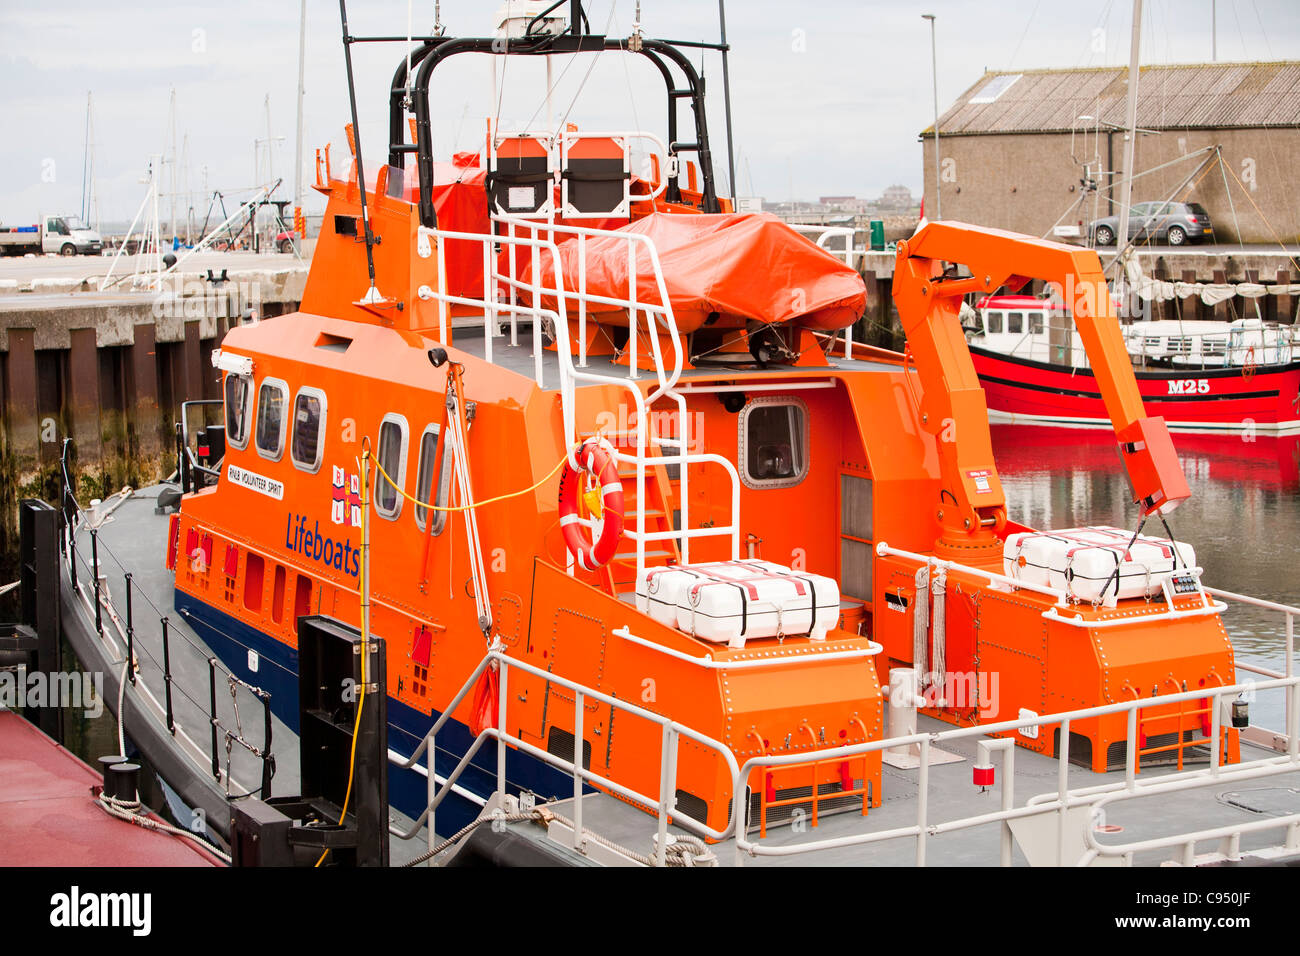 A lifeboat in Kirkwall harbour in the Orkney Isles, Scotland, UK. Stock Photo